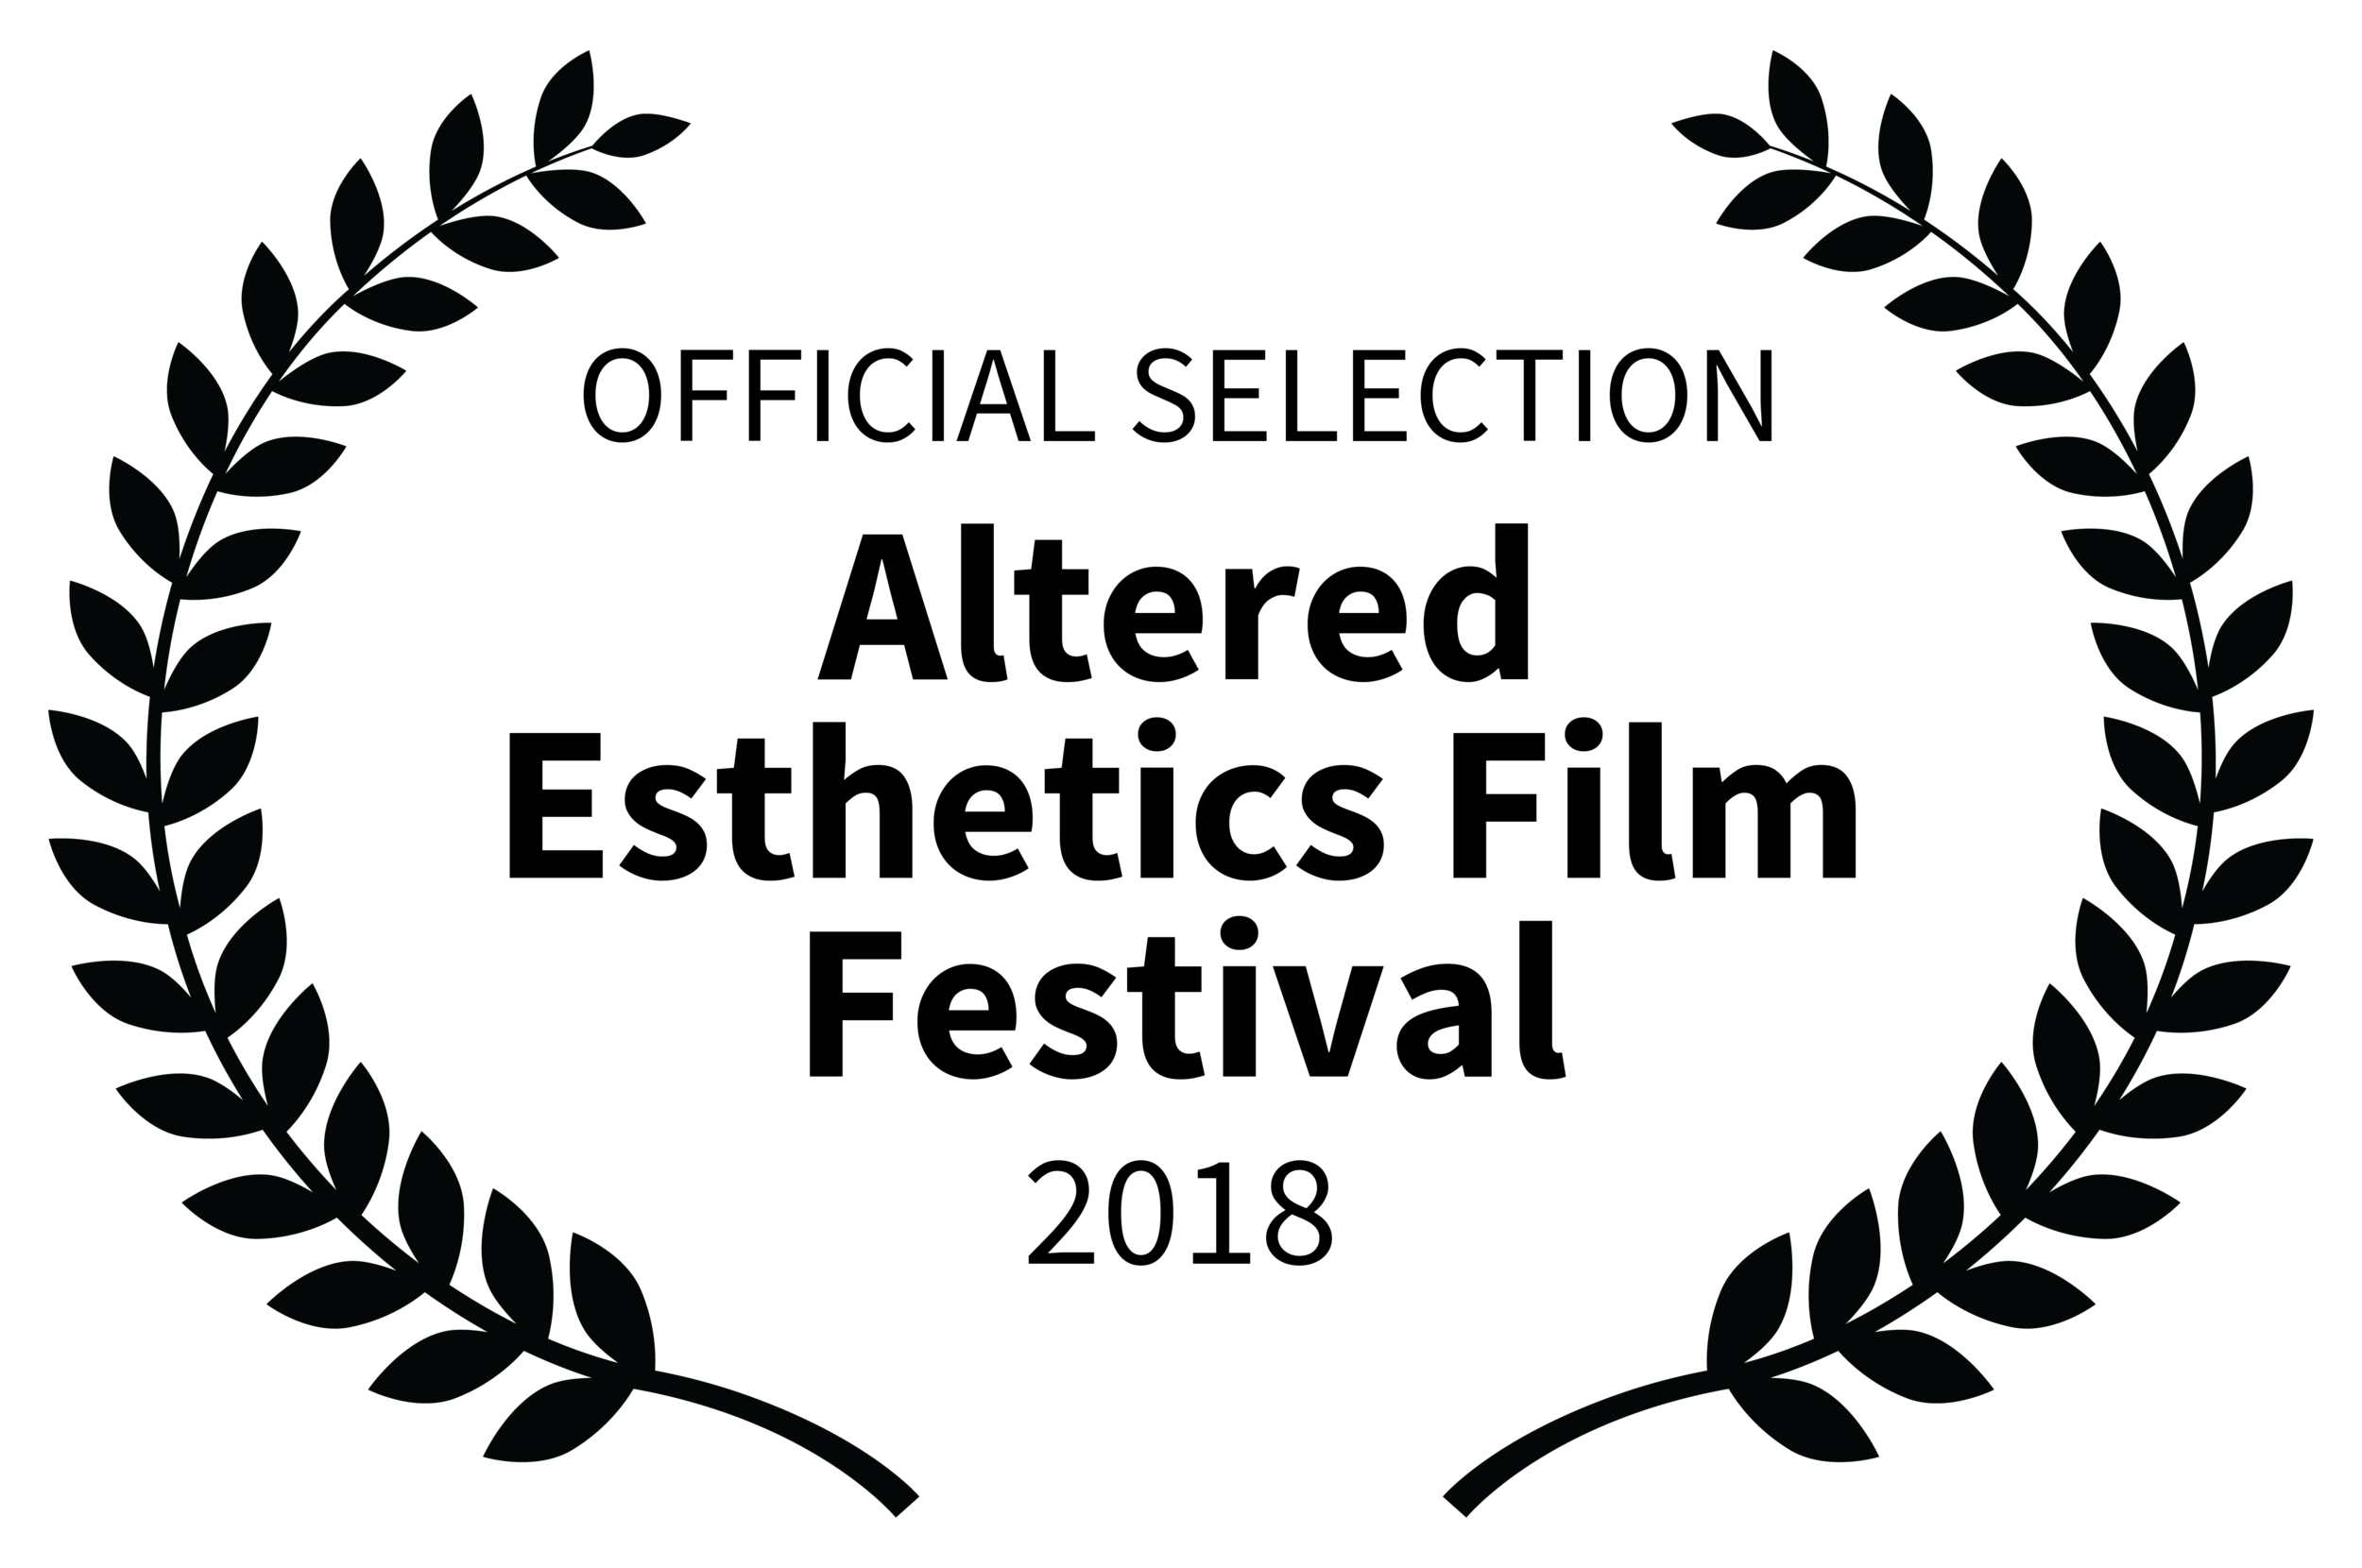 OFFICIALSELECTION-AlteredEstheticsFilmFestival-2018.png